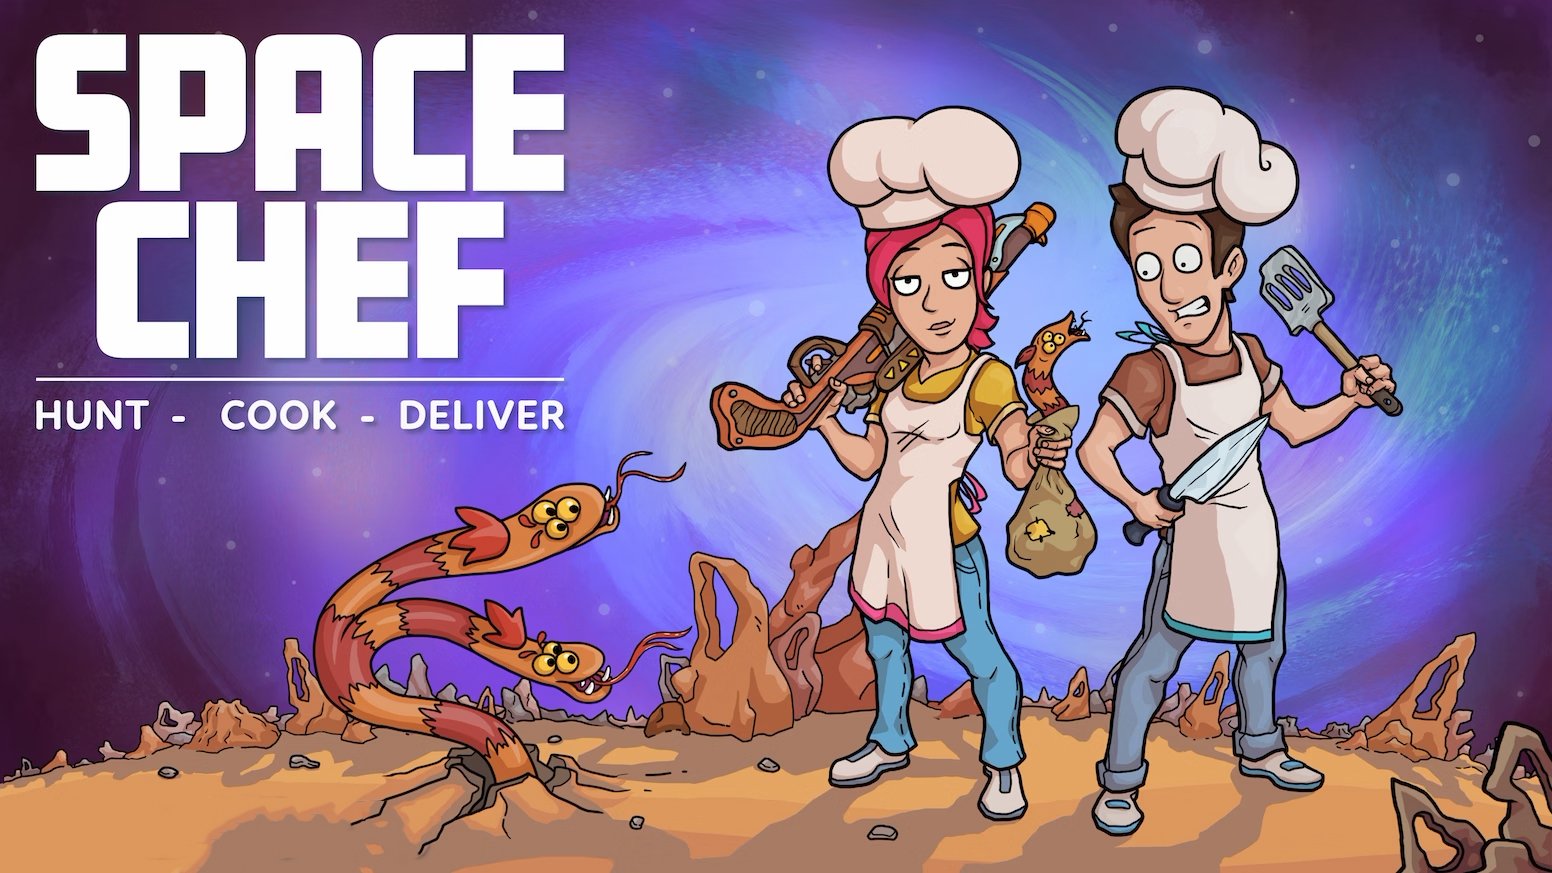 Space Chef